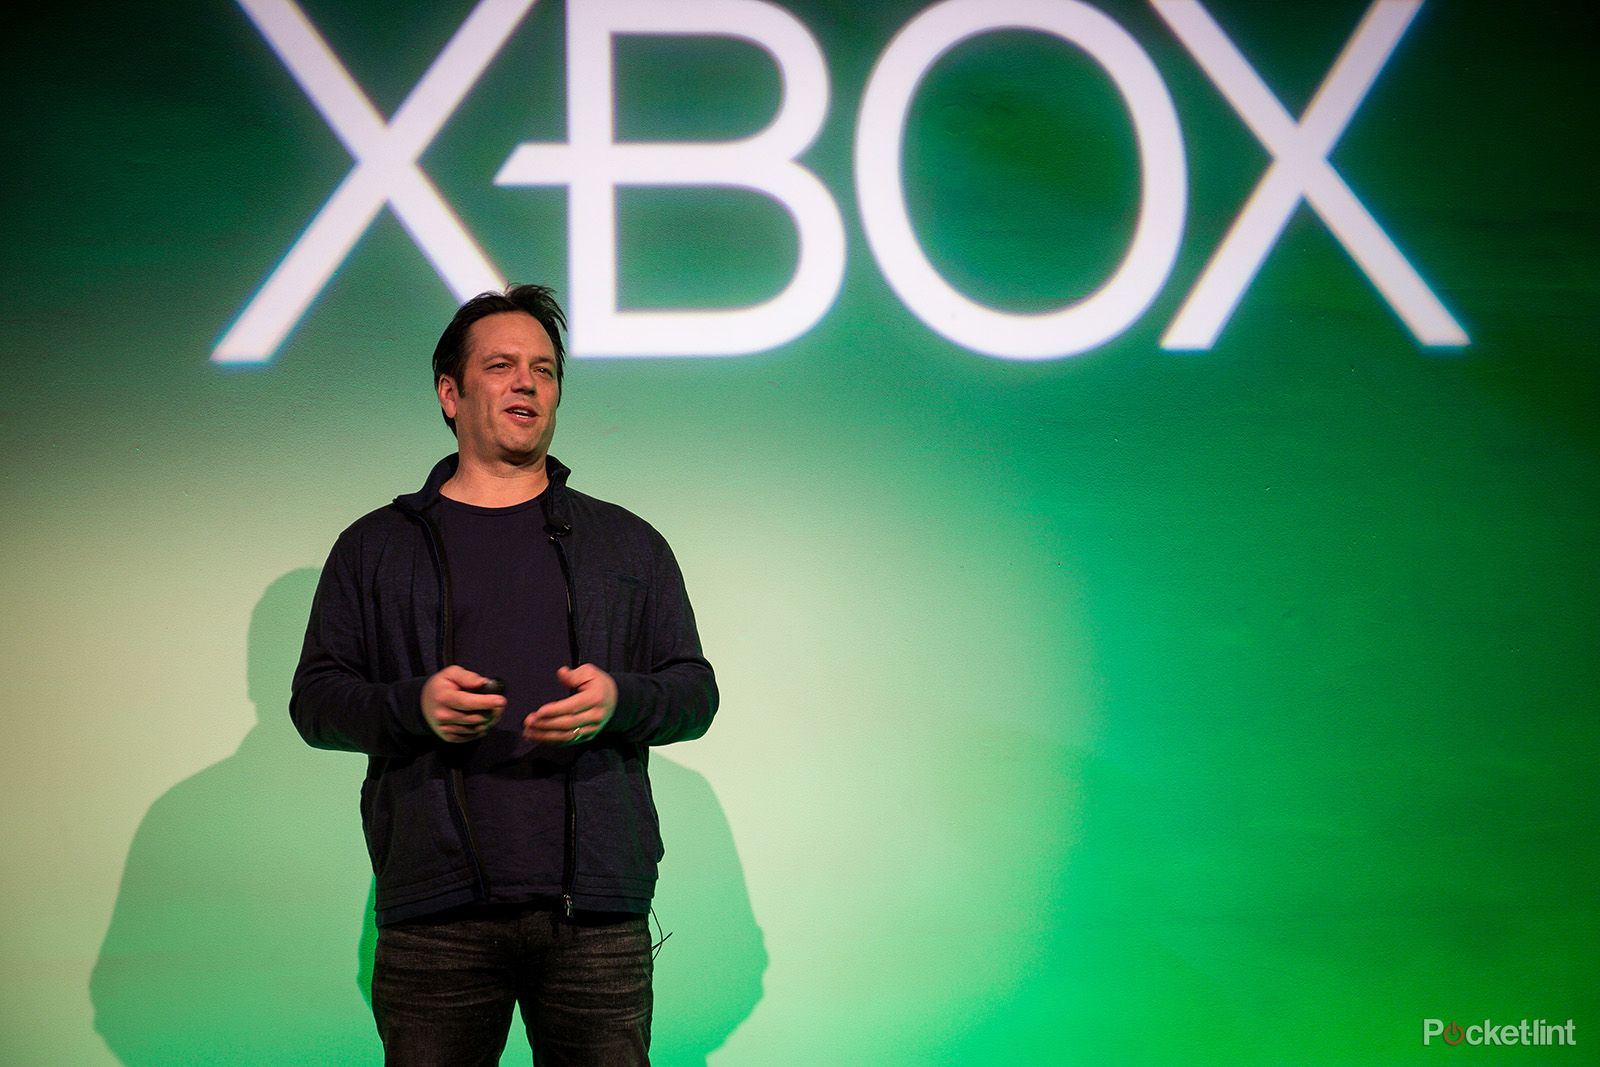 Xbox boss phil spencer stood on stage in front of Xbox logo